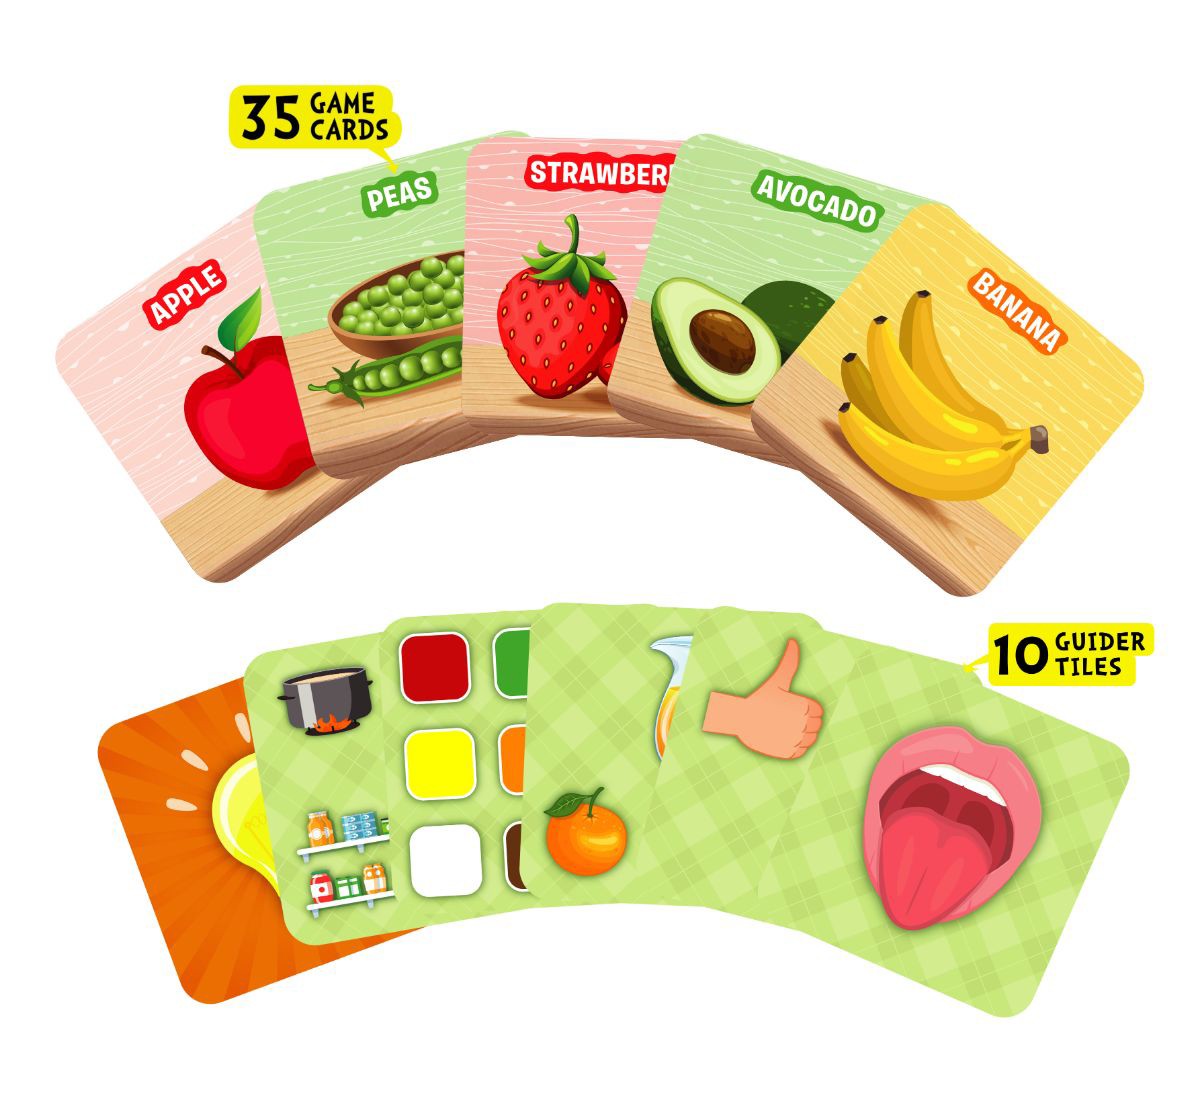 Skillmatics Guess in 10 Junior Food We Eat  Paper card game Multicolor 3Y+